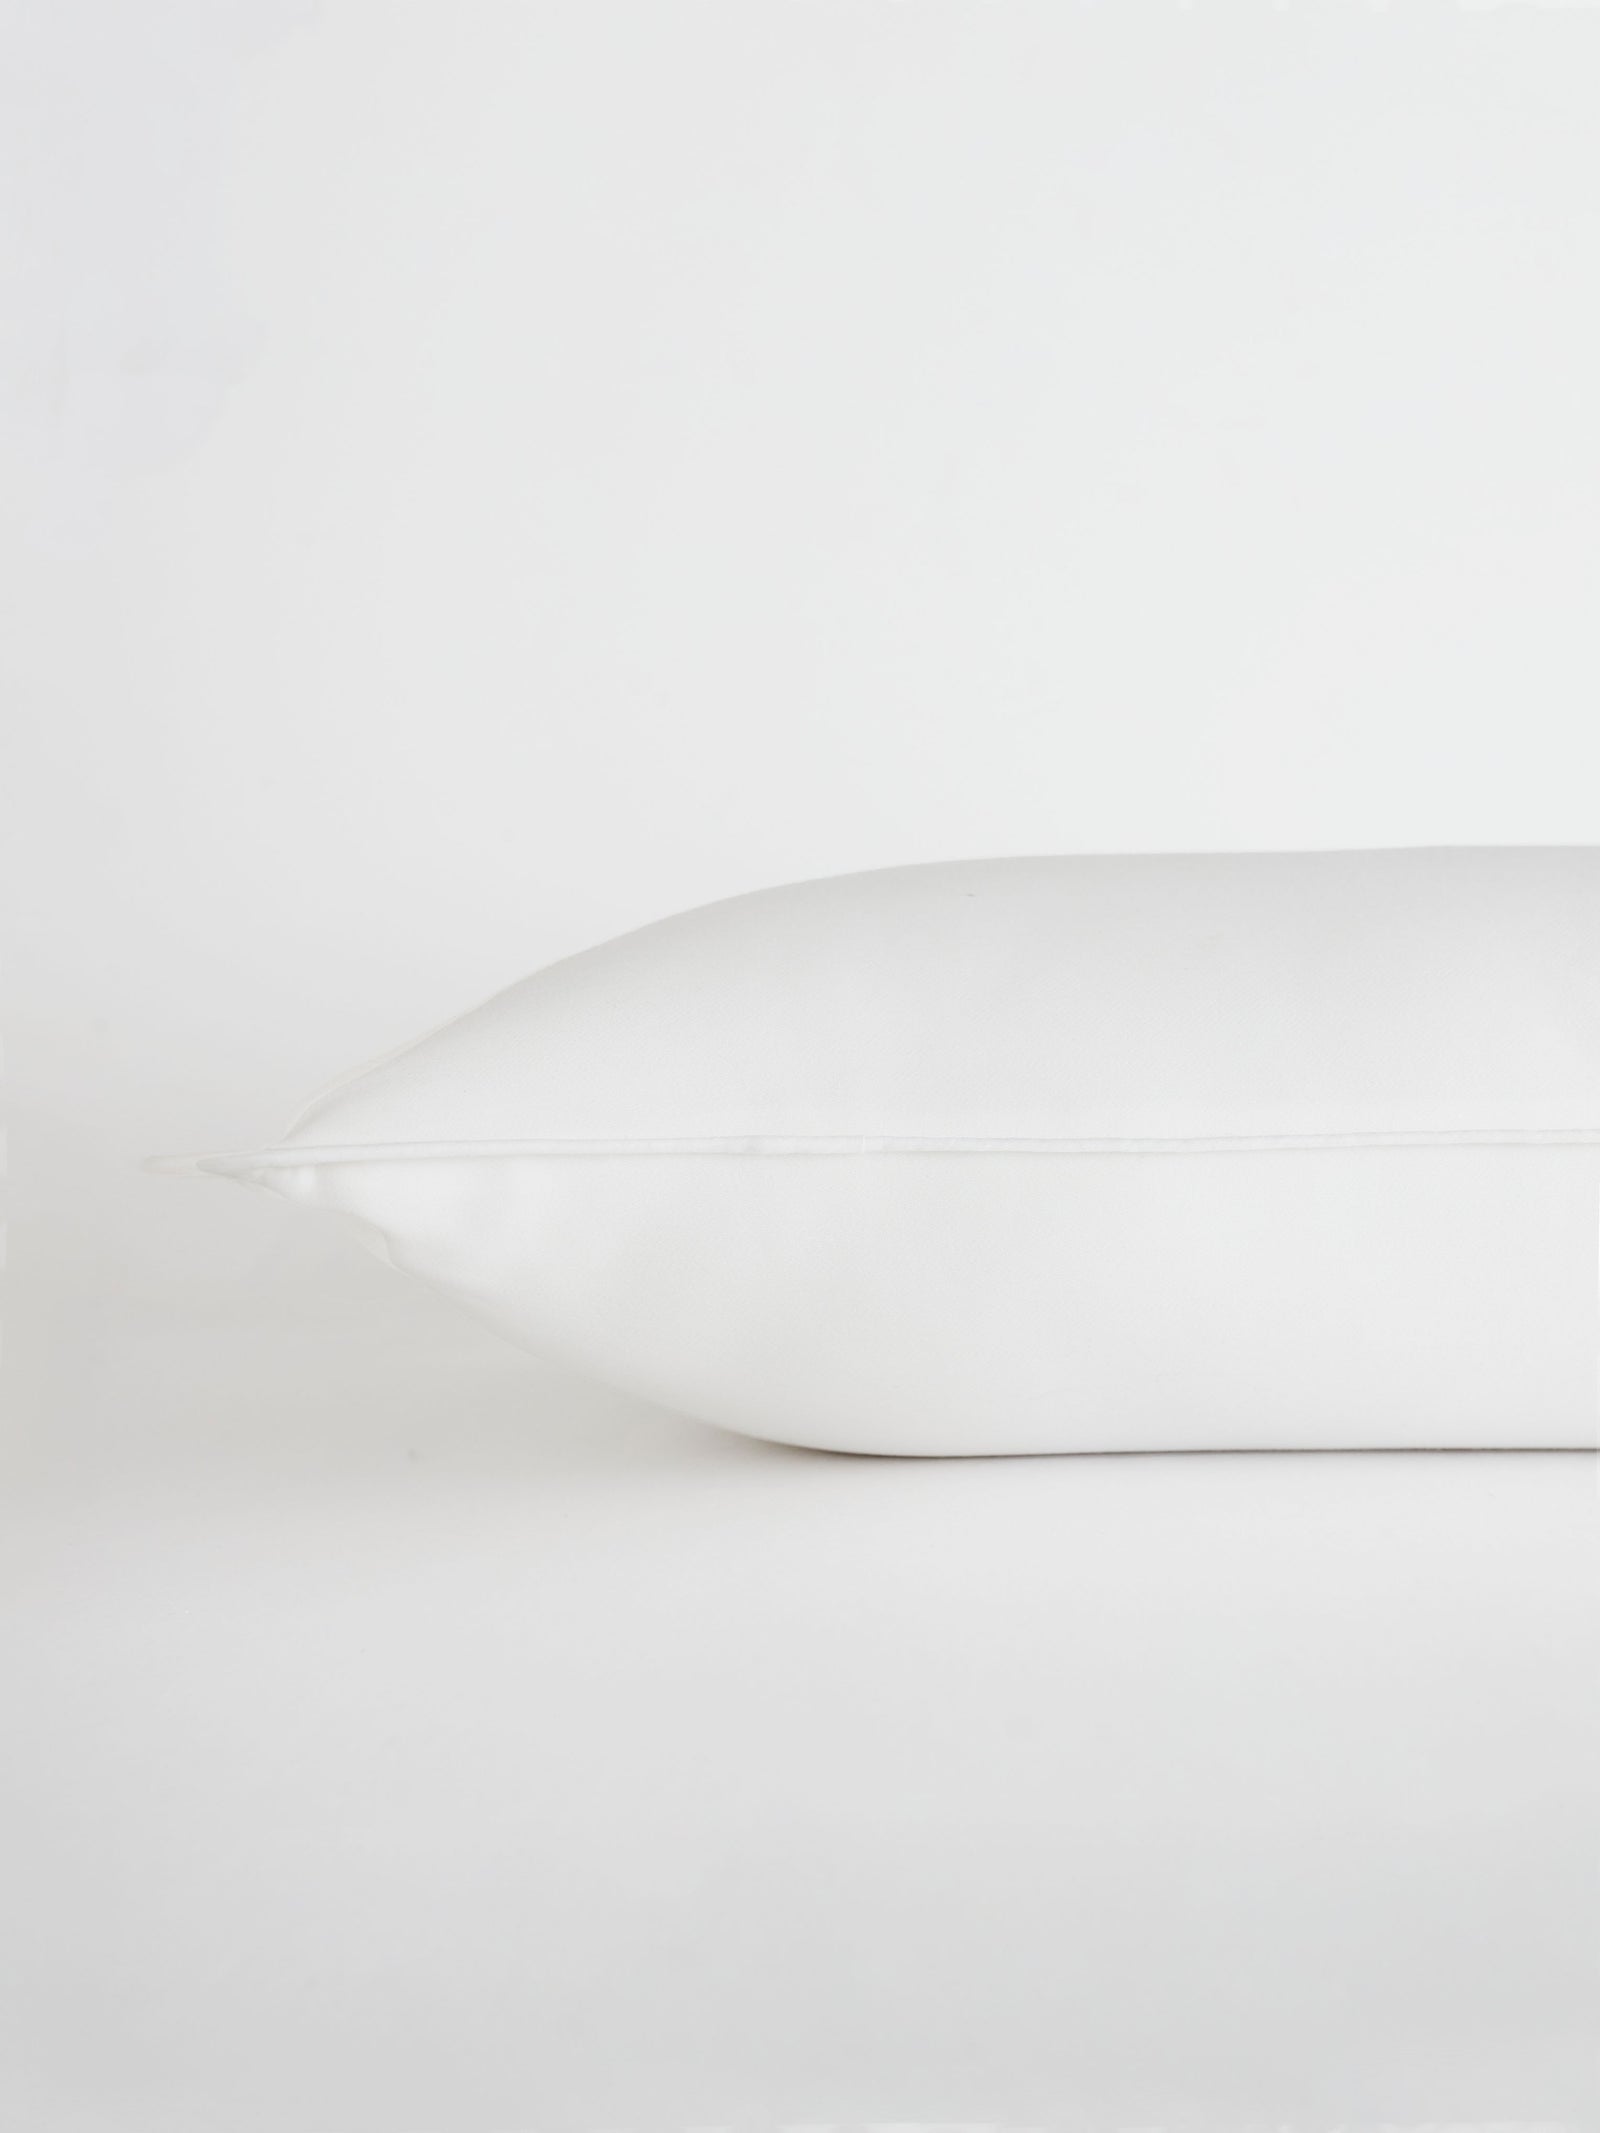 Travel size down pillow with white background 